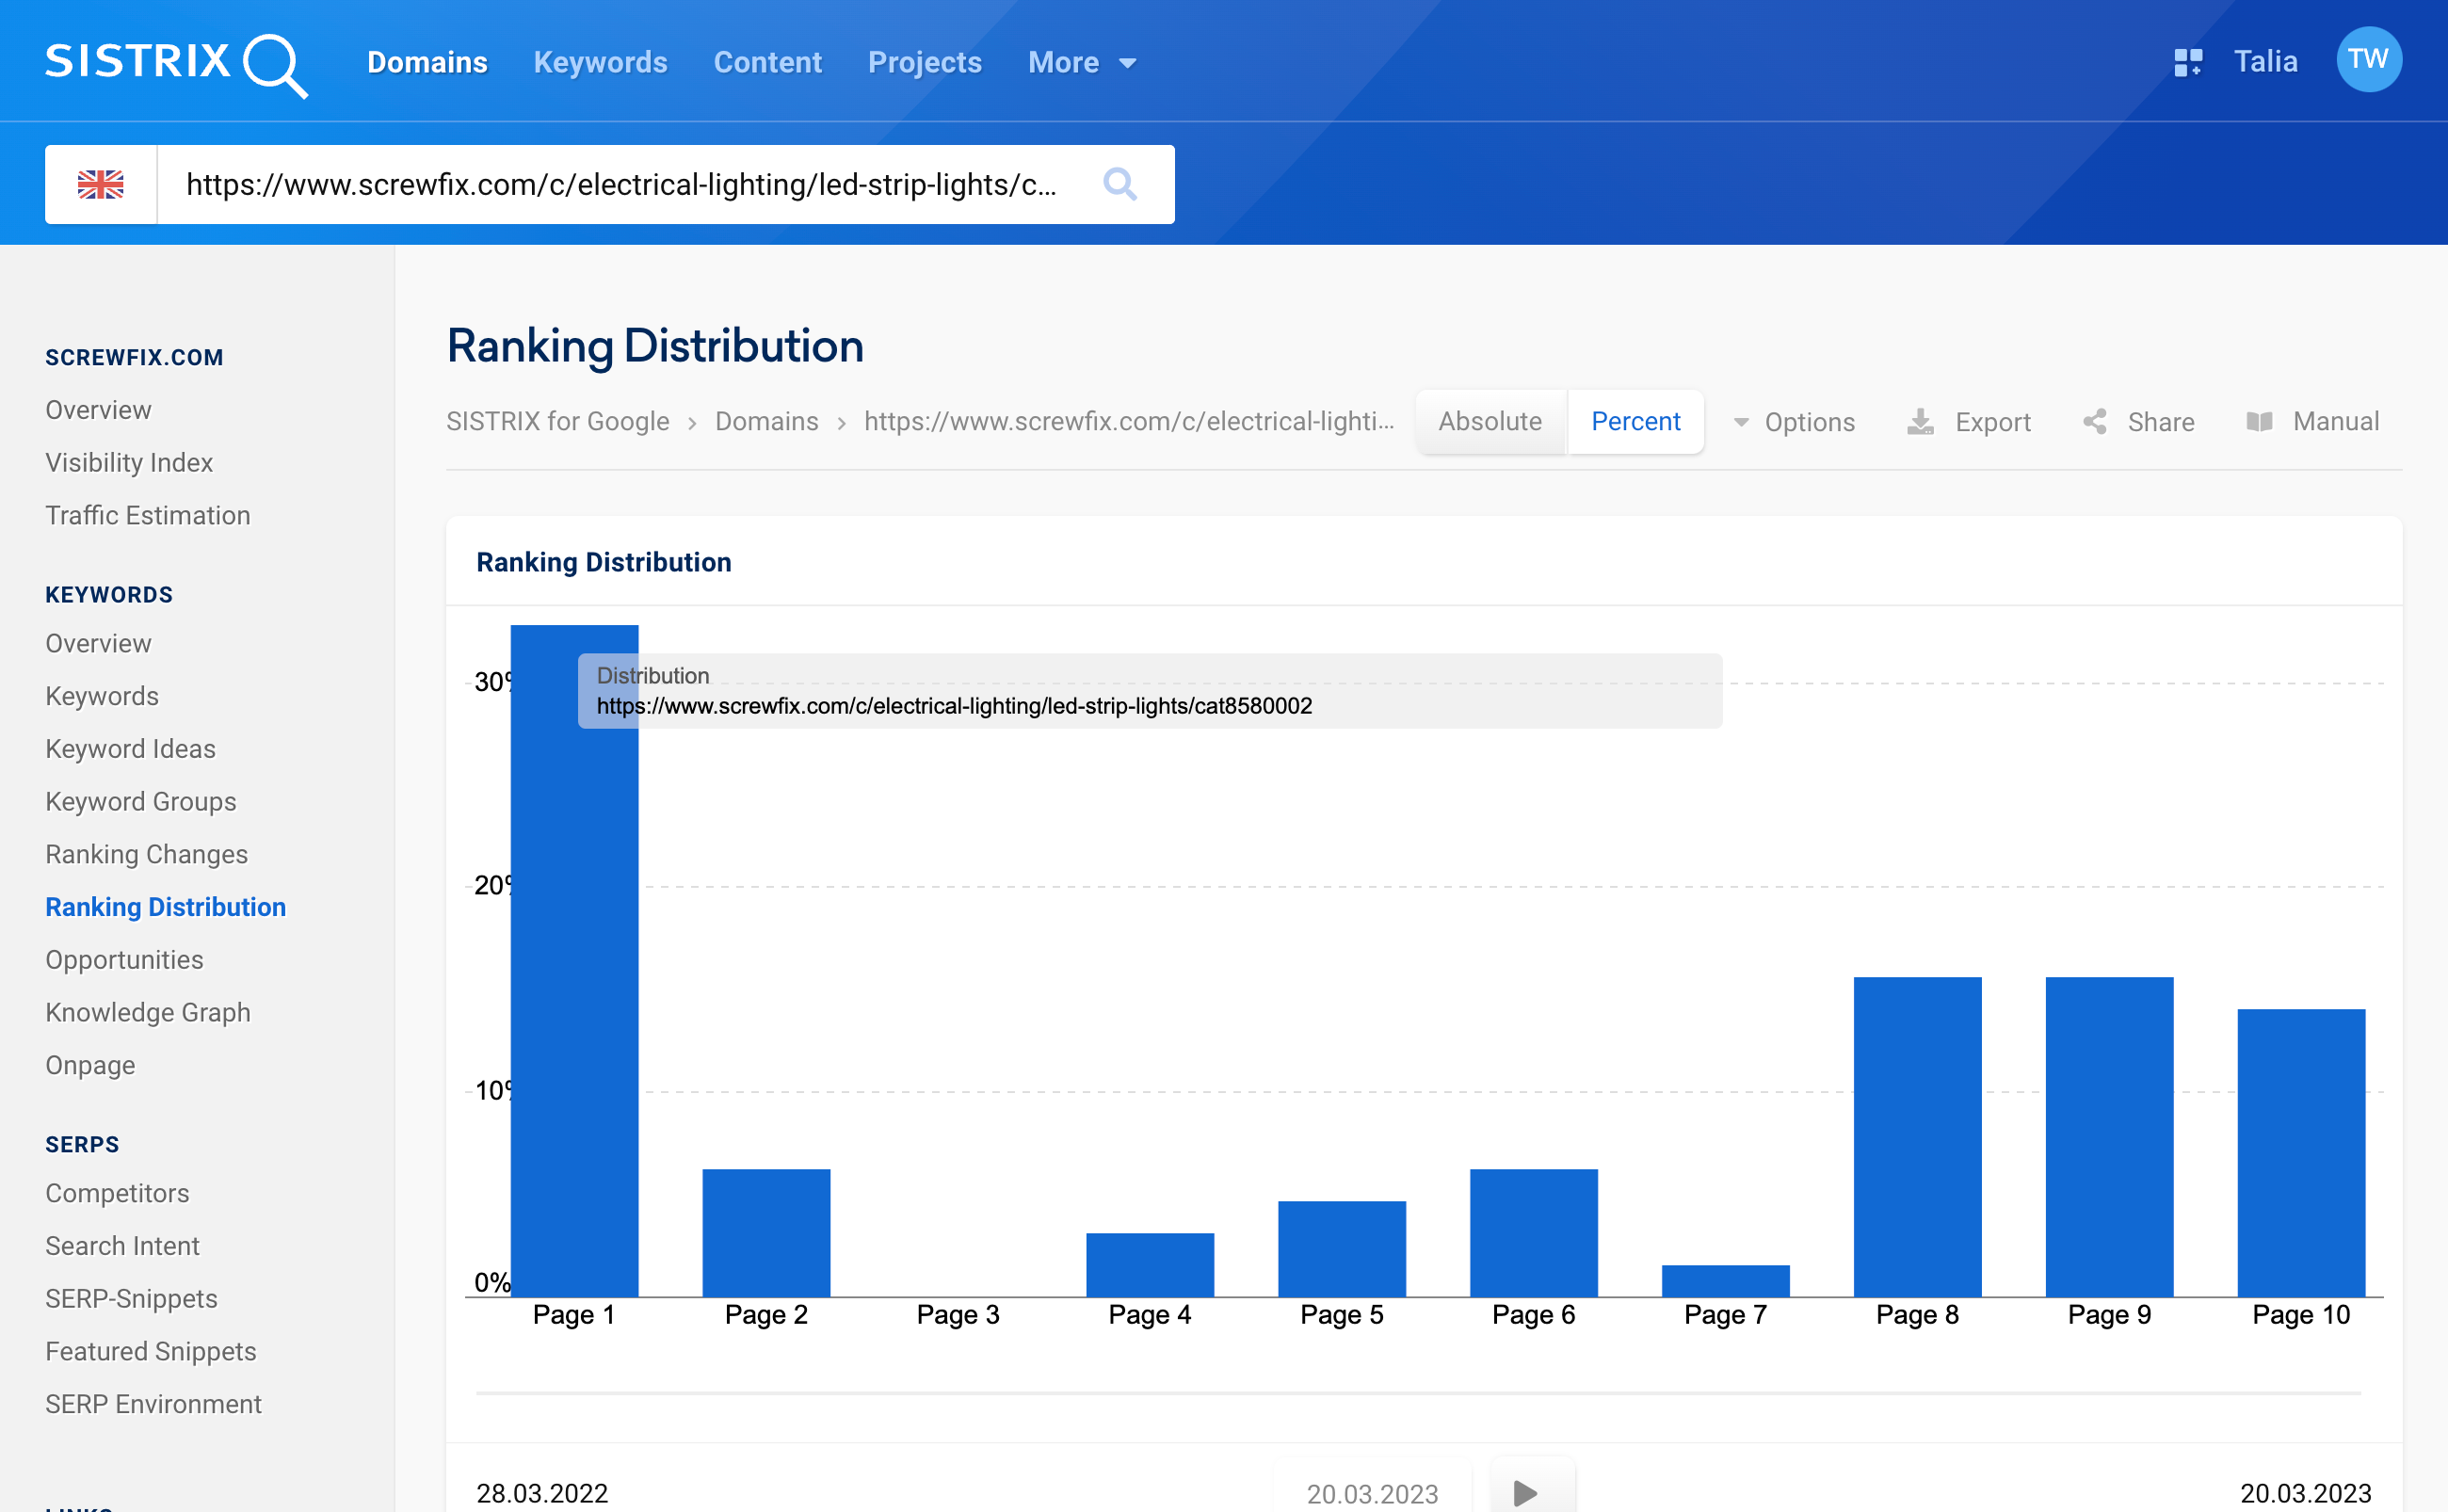 View of the Ranking Distribution page in SISTRIX when entering a single URL.